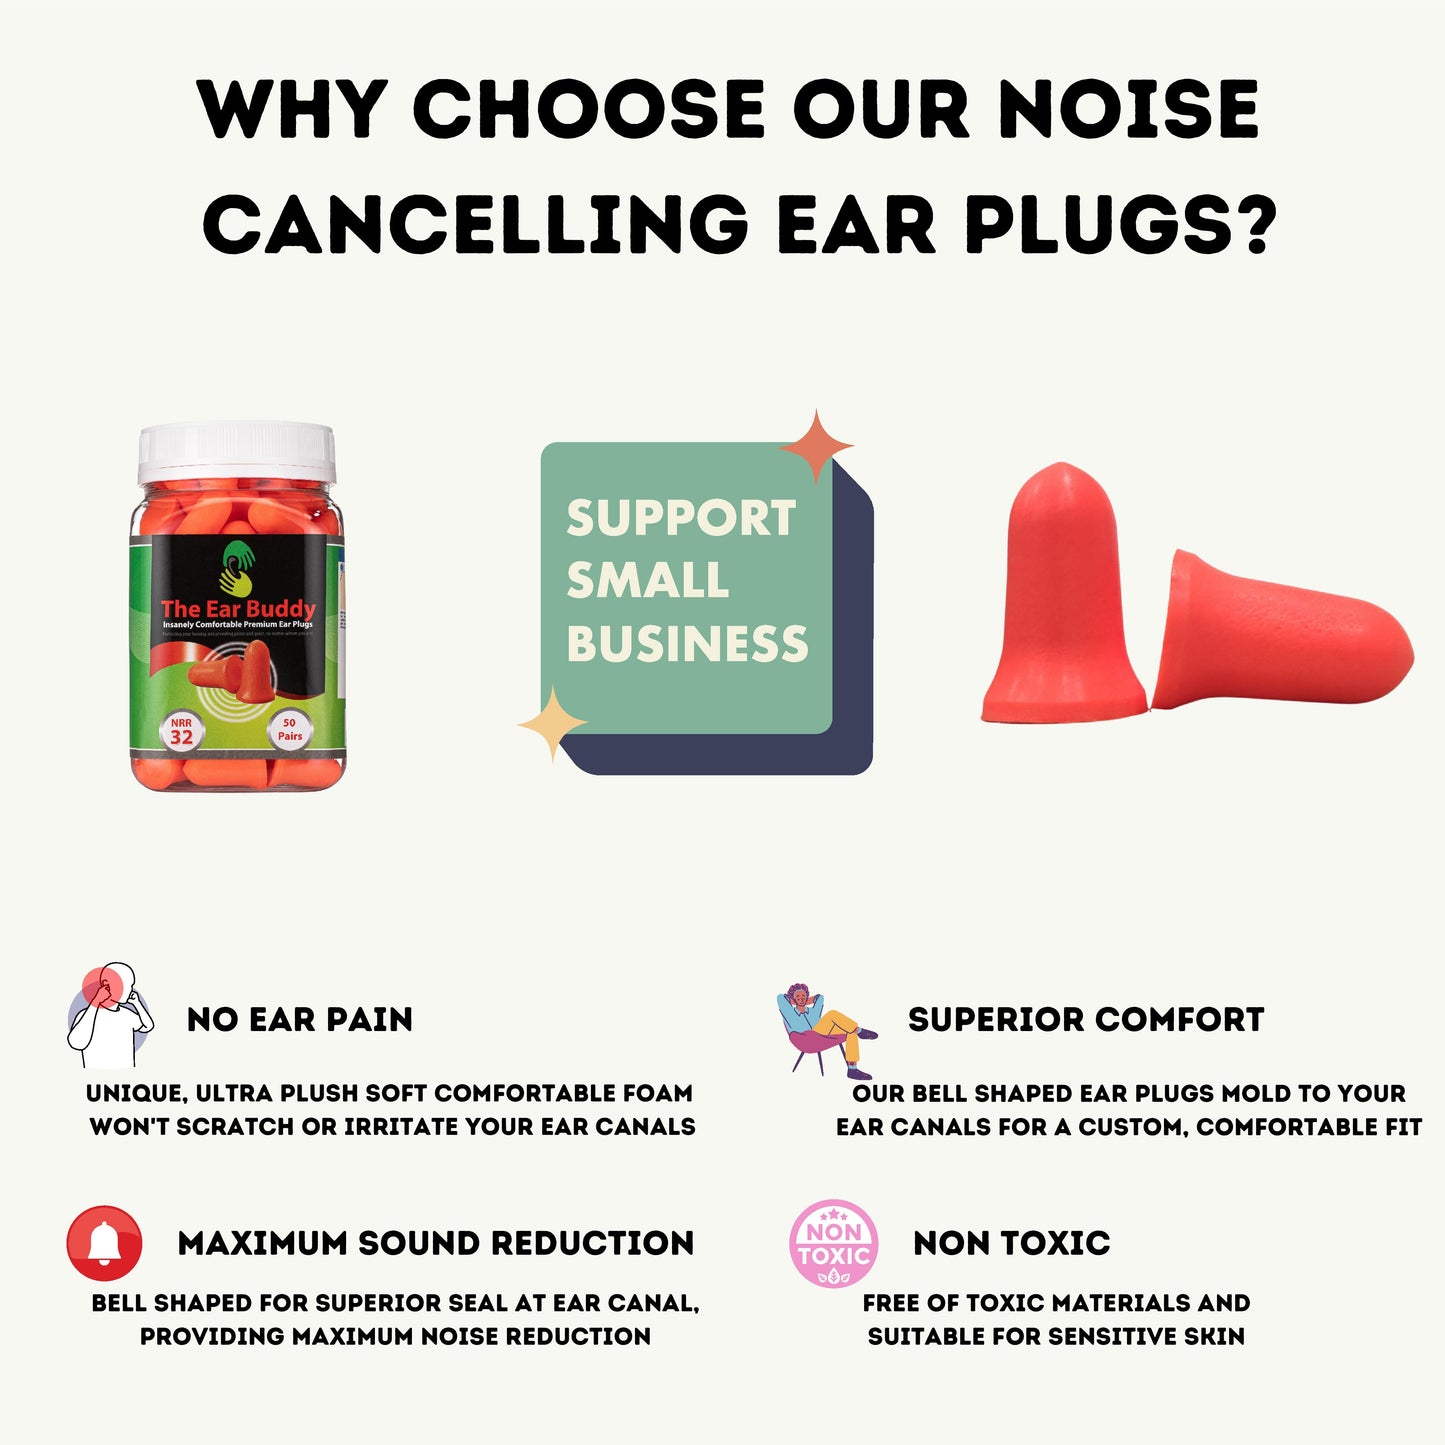 The Ear Buddy Premium Soft Foam Ear Plugs, Noise Cancelling Earplugs for Sleeping, Hearing Protection for Concerts, Work, Shooting & Travel, Noise Reduction Rating 32 Decibels, 50 Pairs